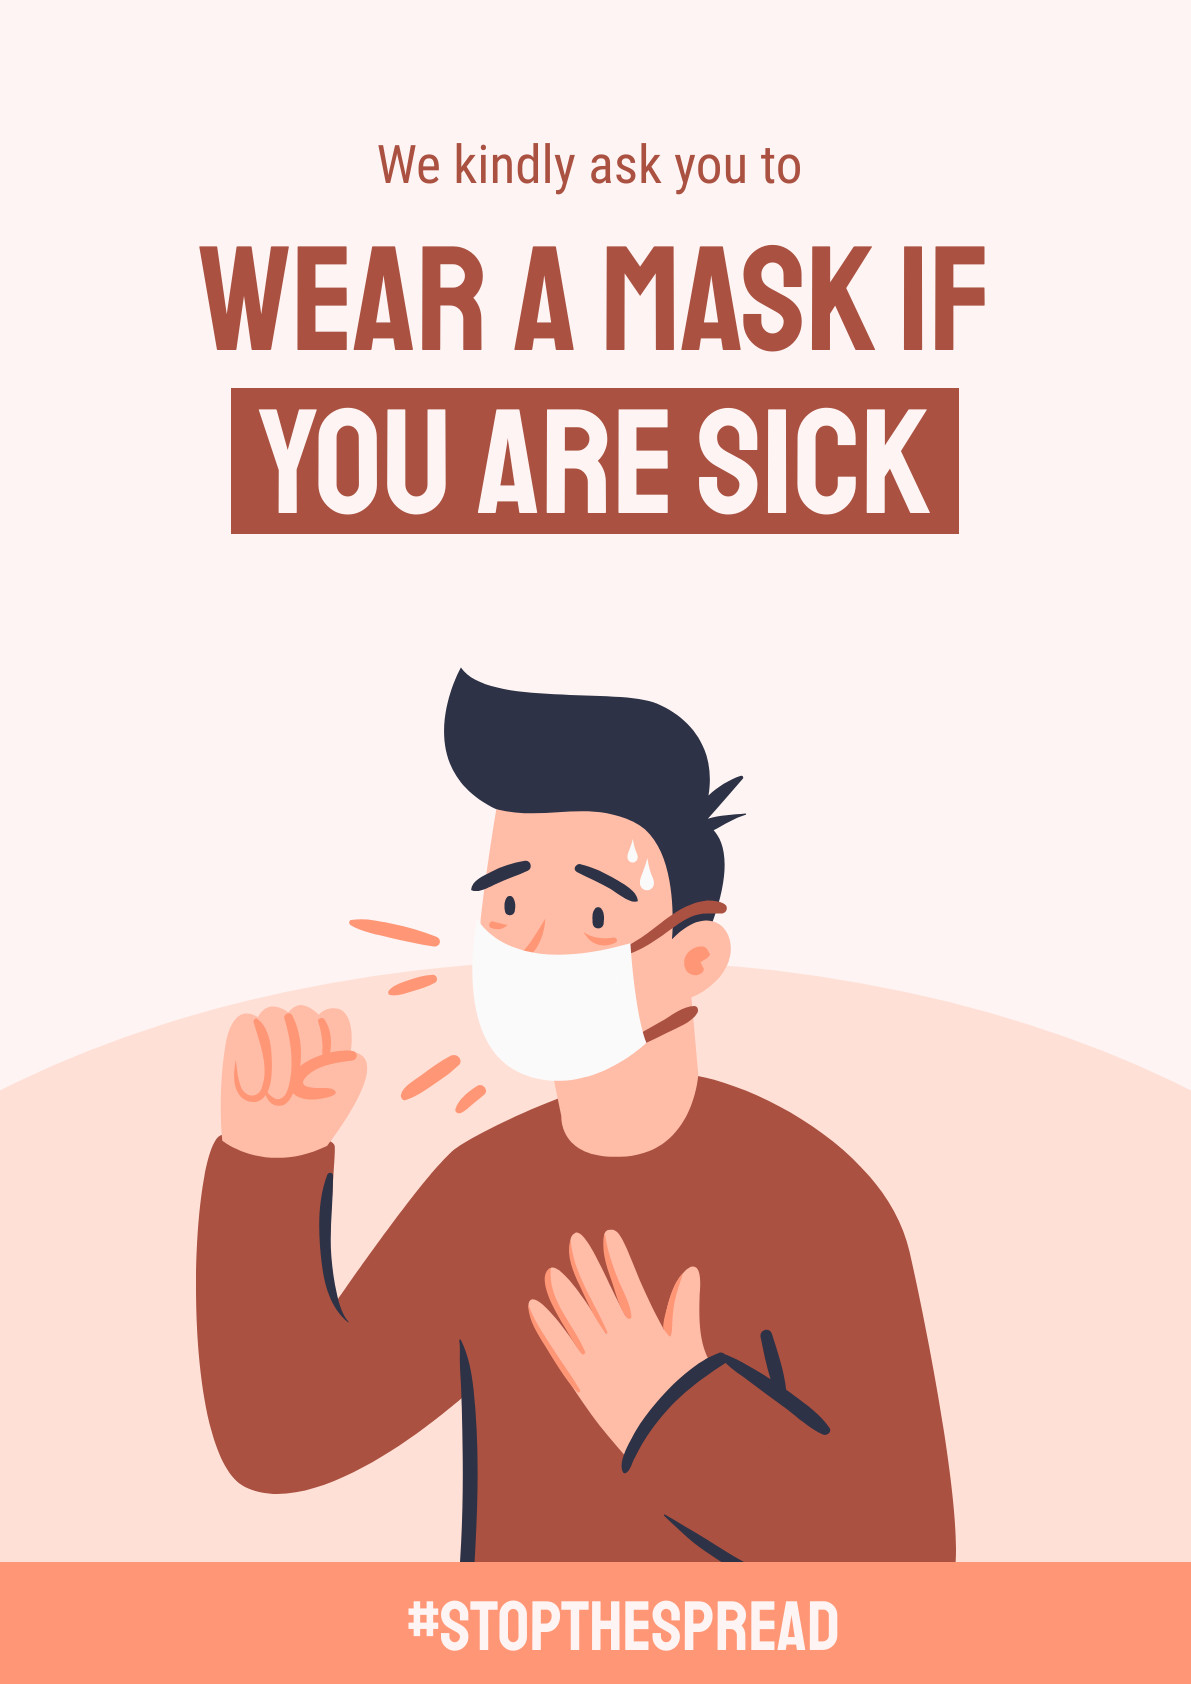 Kindly Wear a Mask Covid19 – Poster Template 1191x1684